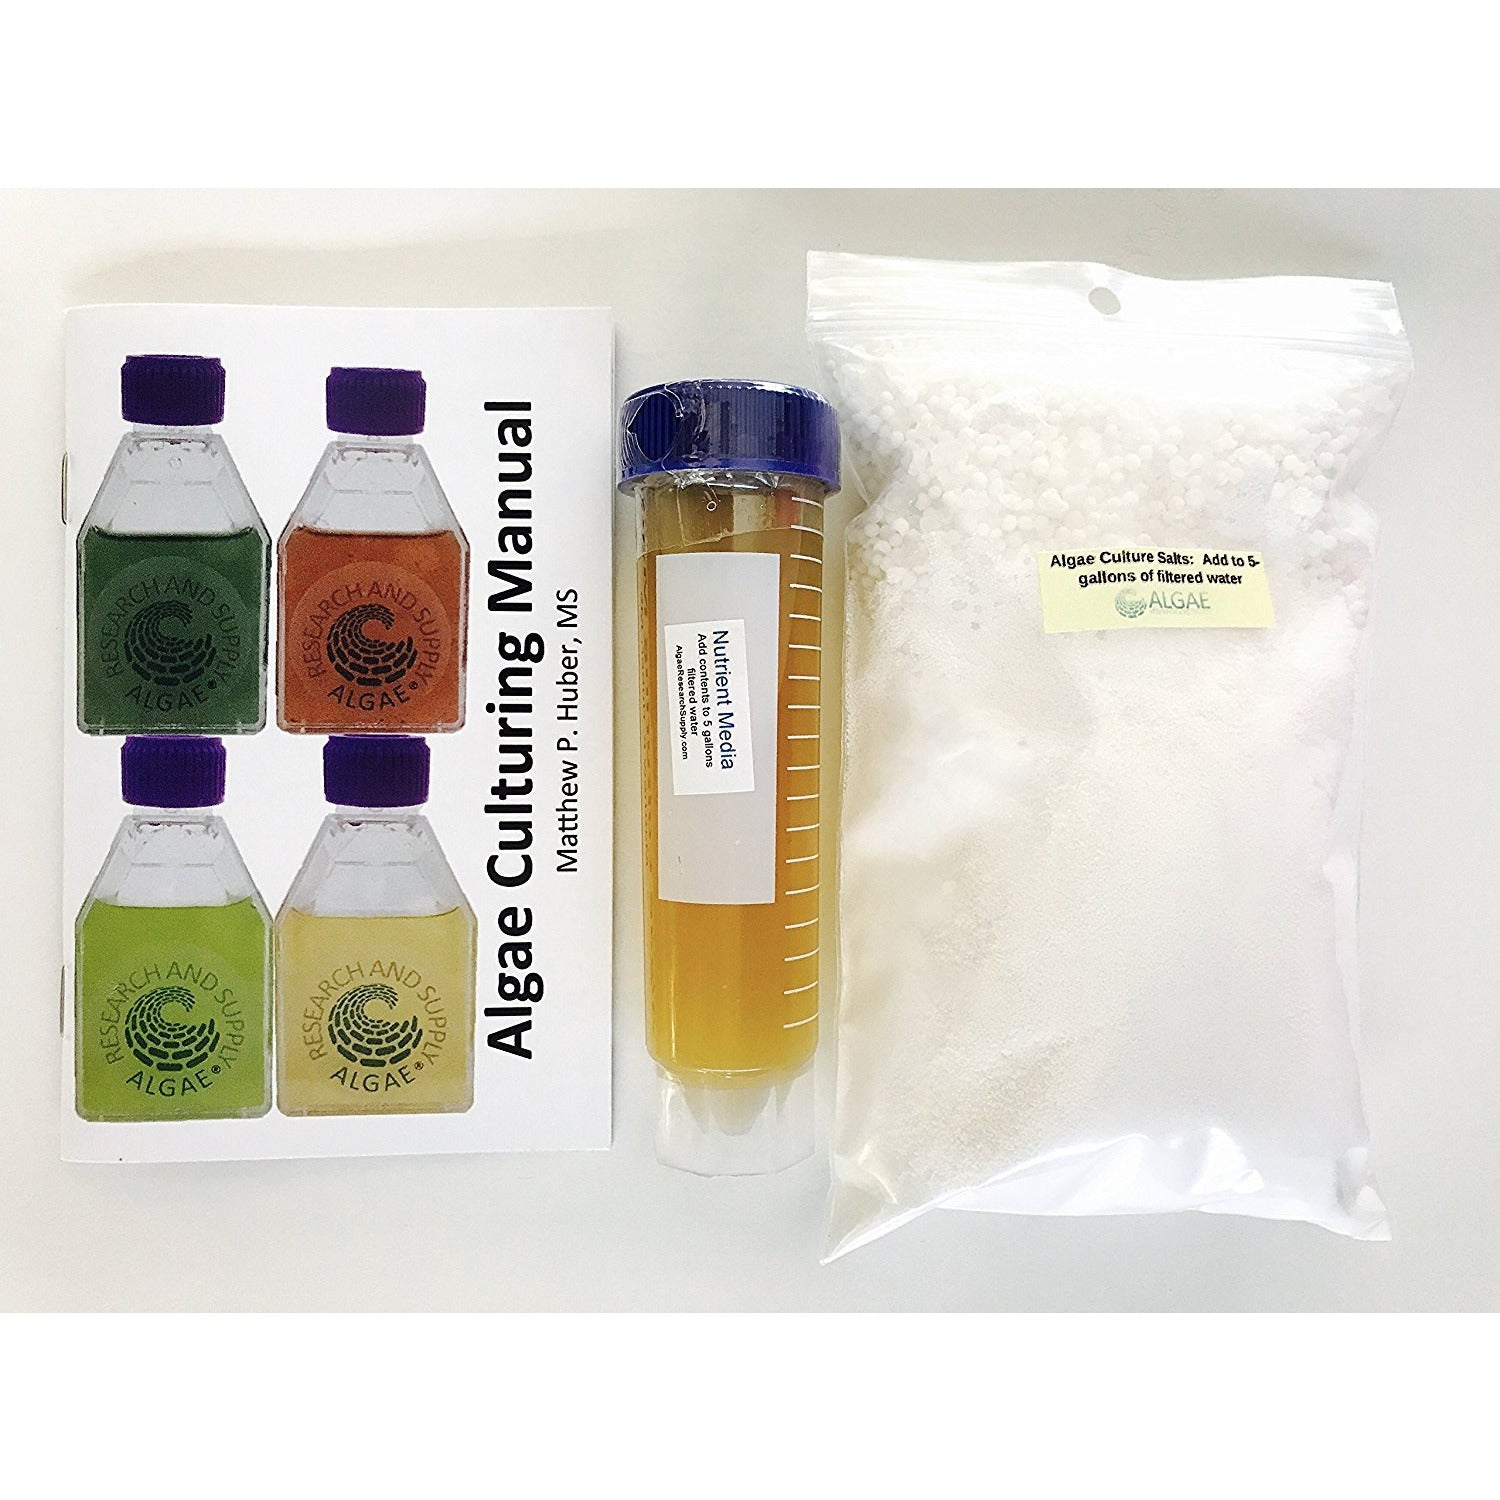 Spirulina culturing kit, salts, nutrients, and instructions.